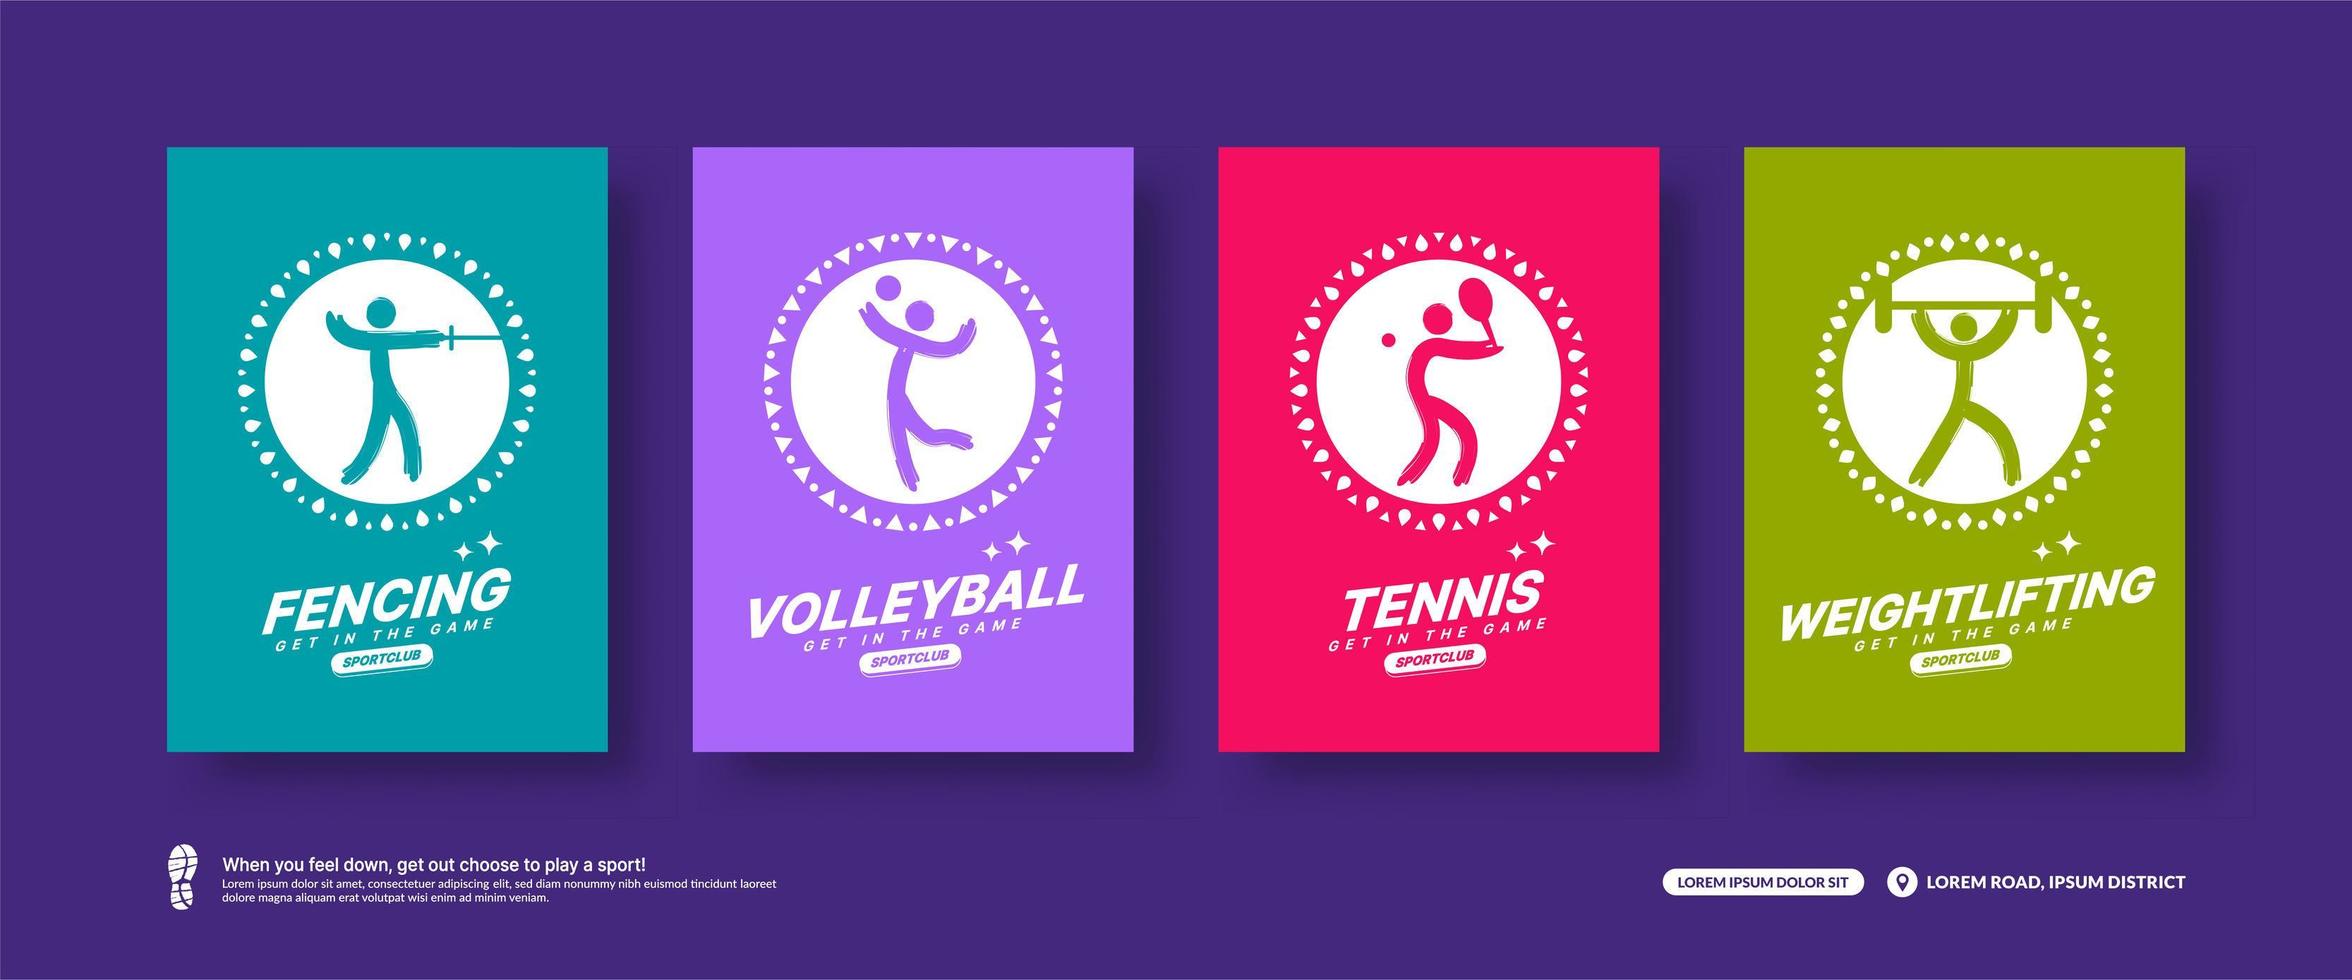 Minimal  Sport cards set, Sport icons flat design concept. Fencing, Volleyball, Tennis and Weightlifting tournament poster templates vector